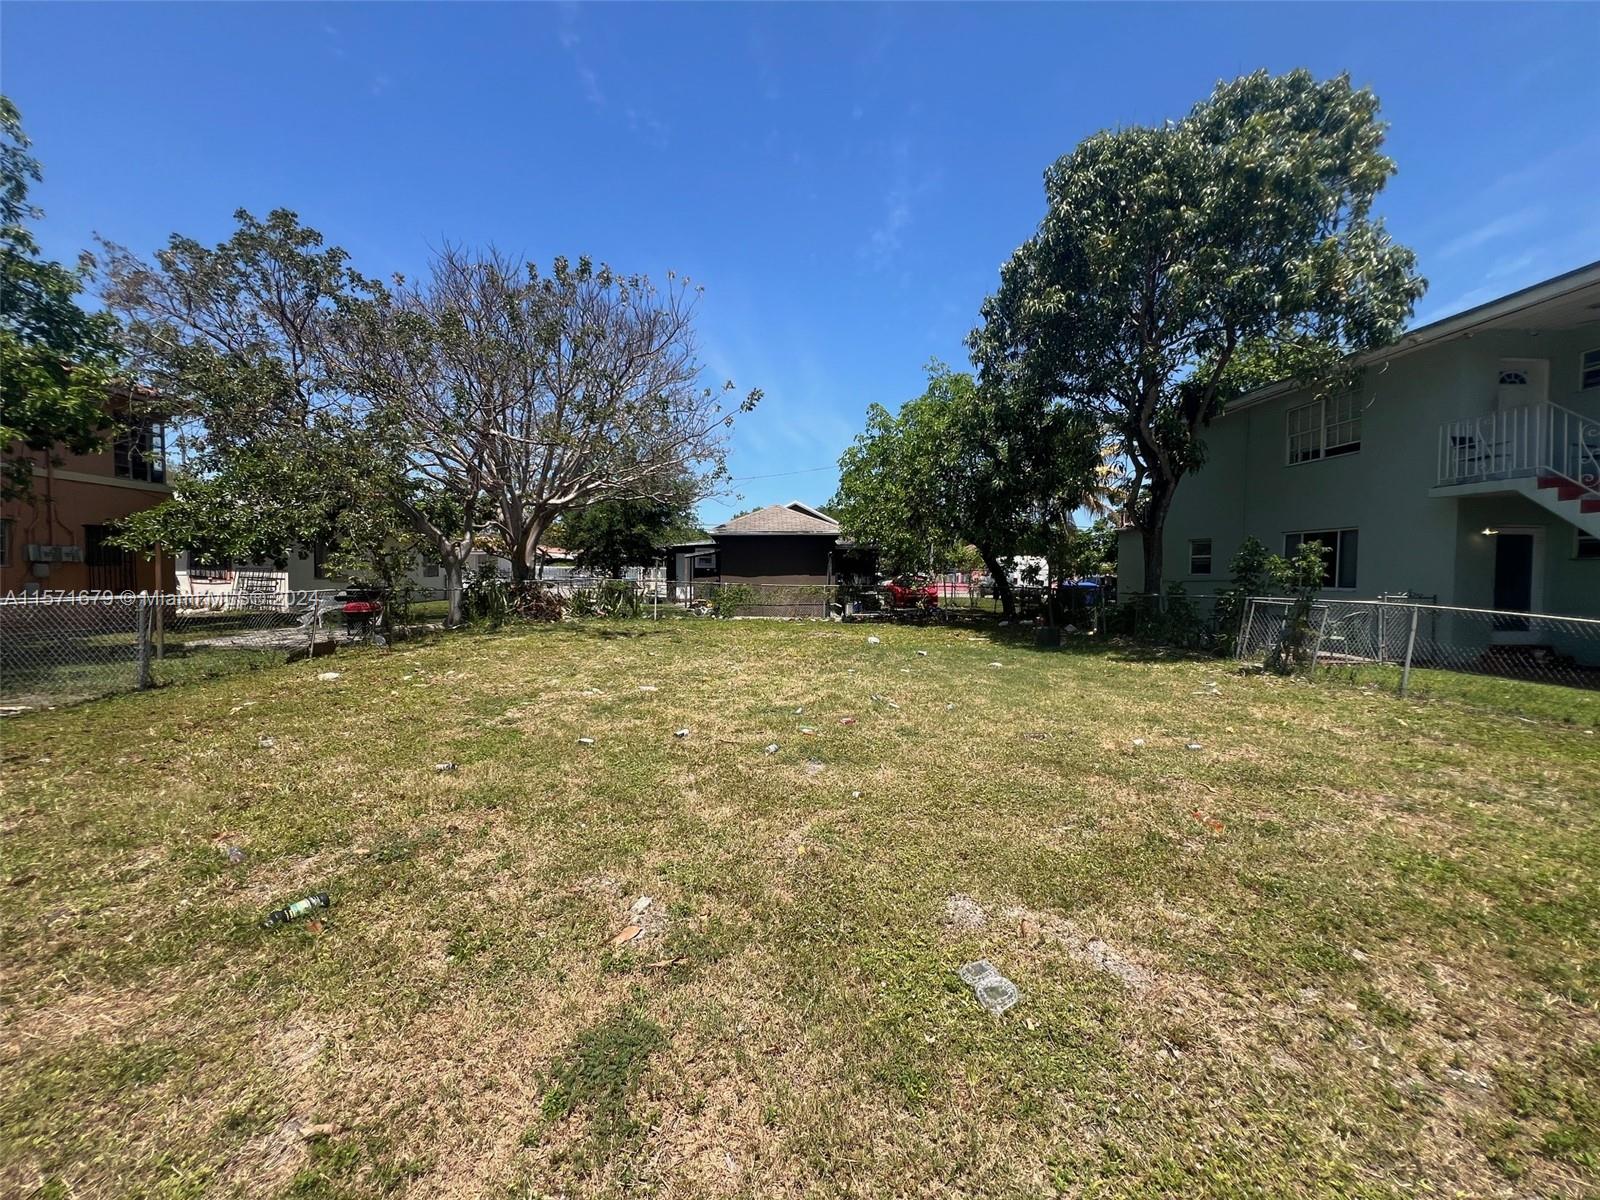 919 NW 29th Ter, Miami, Florida 33127, ,Land,For Sale,919 NW 29th Ter,A11571679